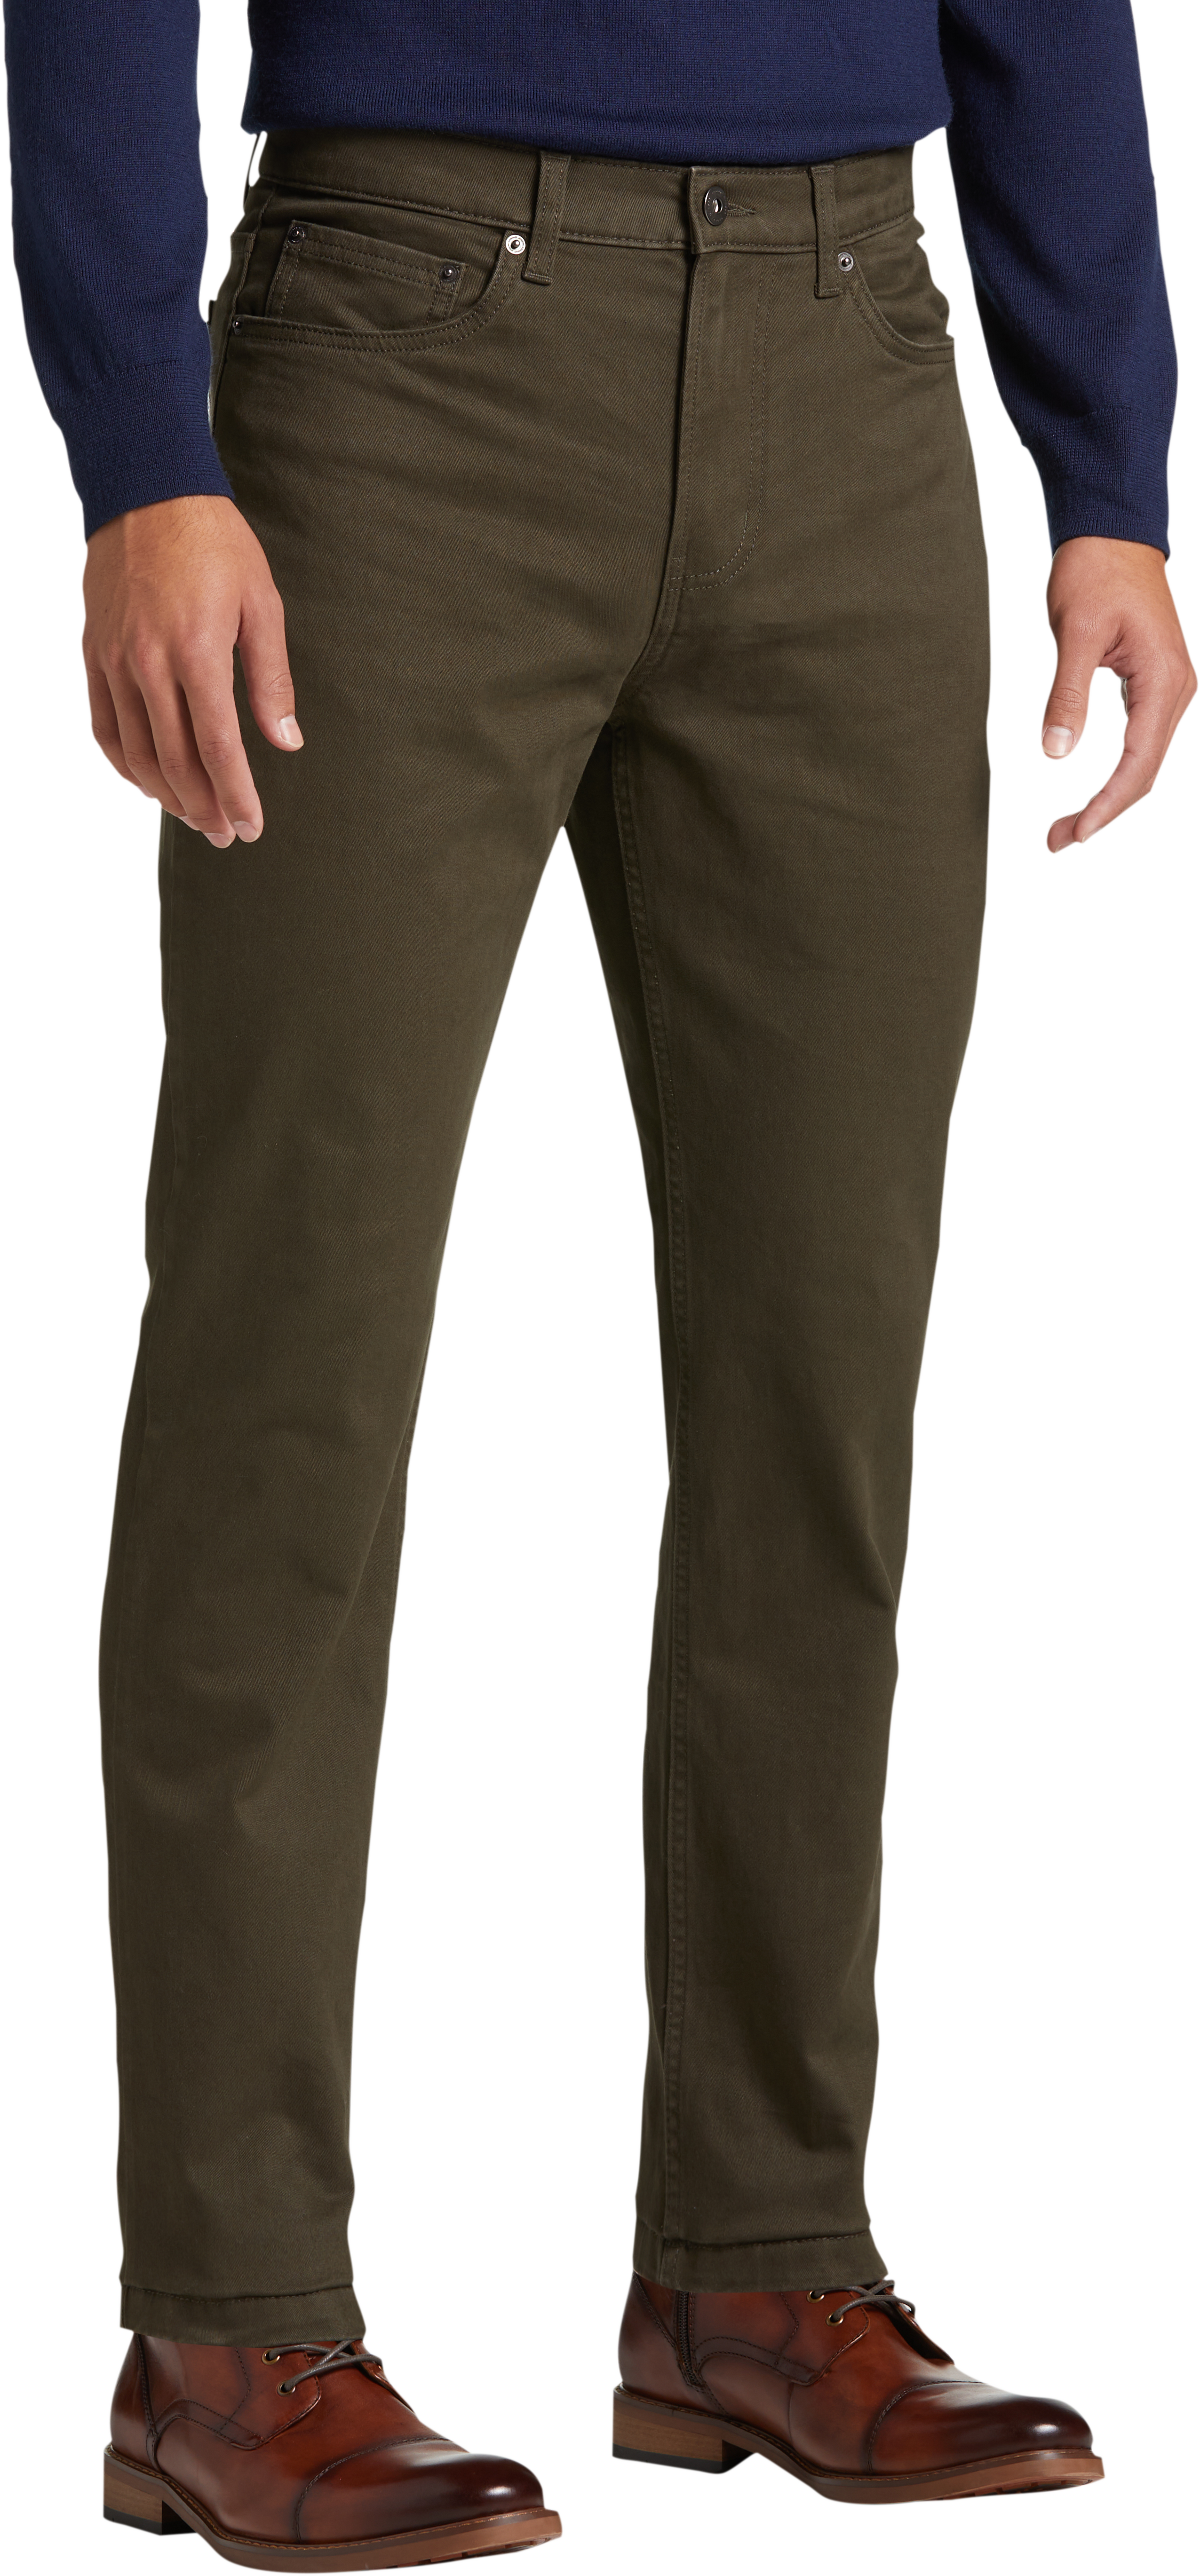 Joseph Abboud Modern Fit Luxe Power Stretch Twill Pants, Olive - Men's ...